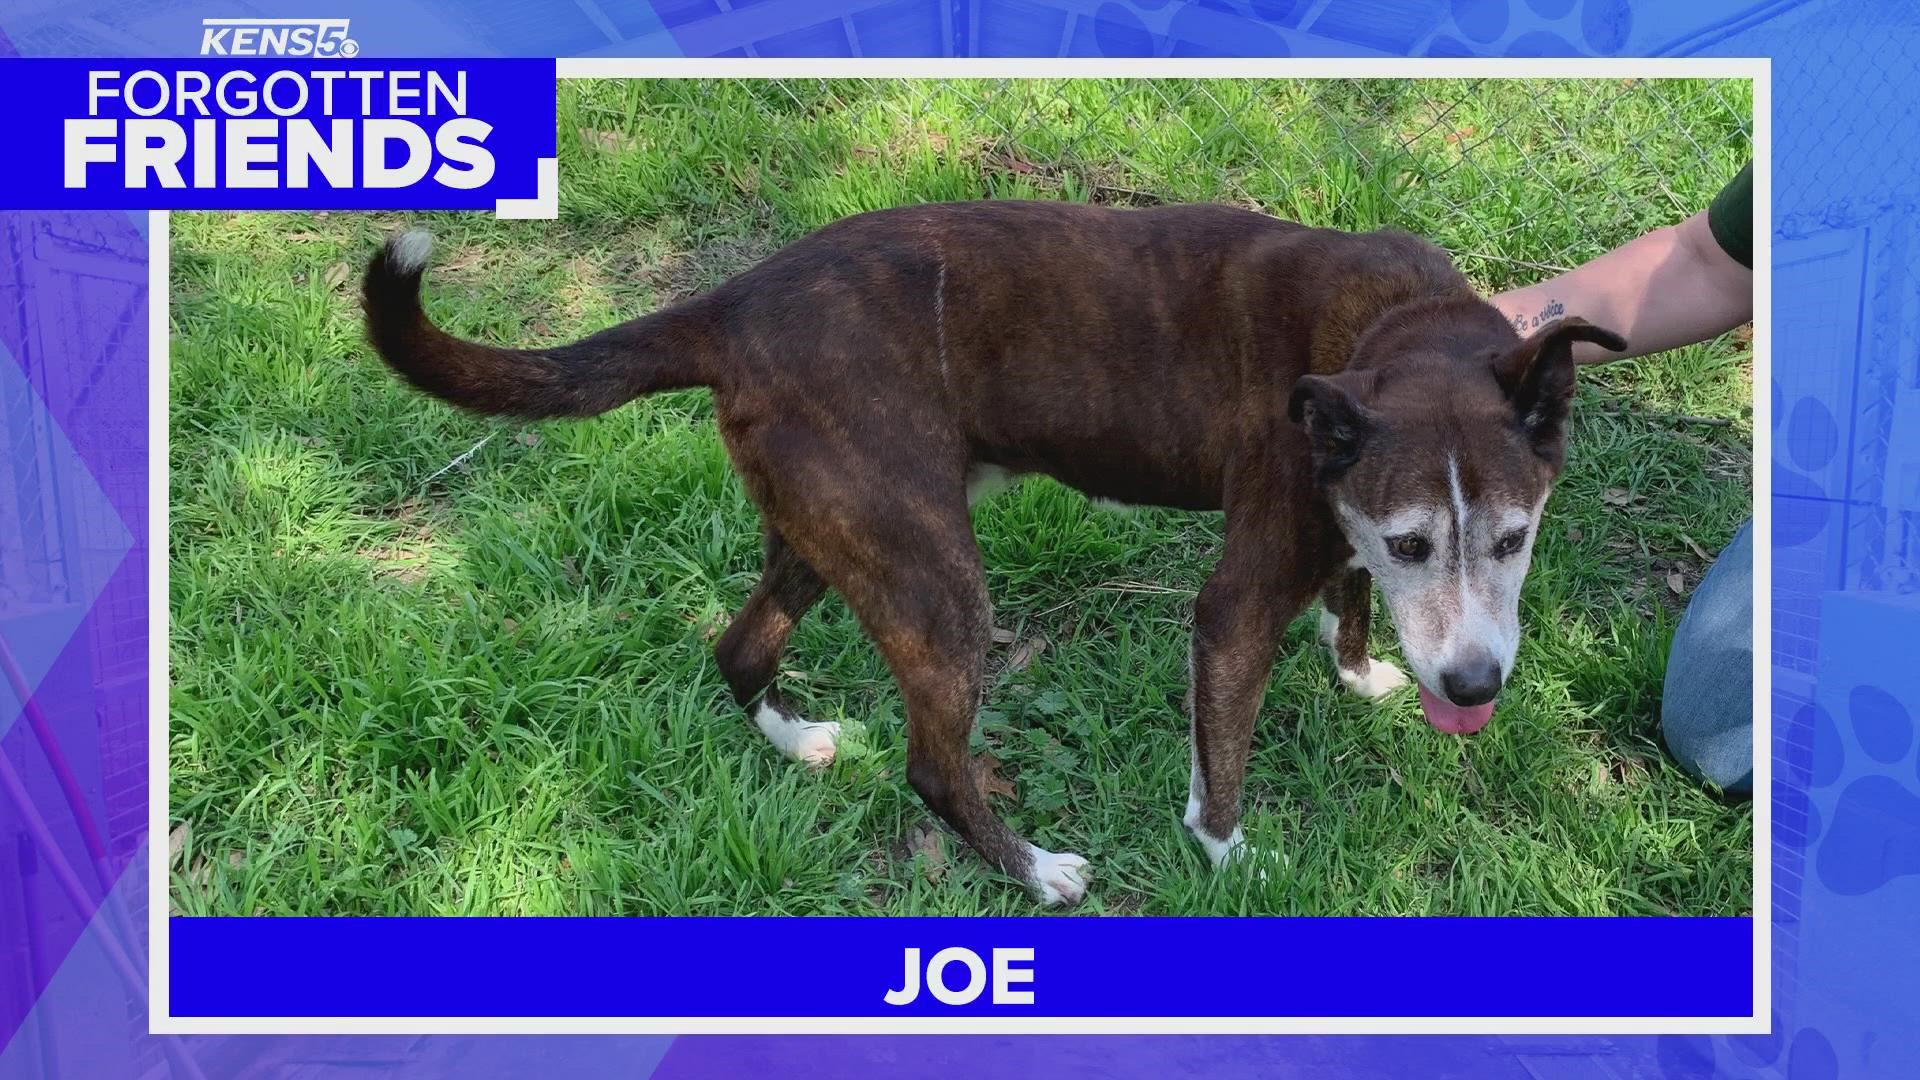 Joe has been at the ADL for more than five years after being found as a stray in Wilson County during Hurricane Harvey.